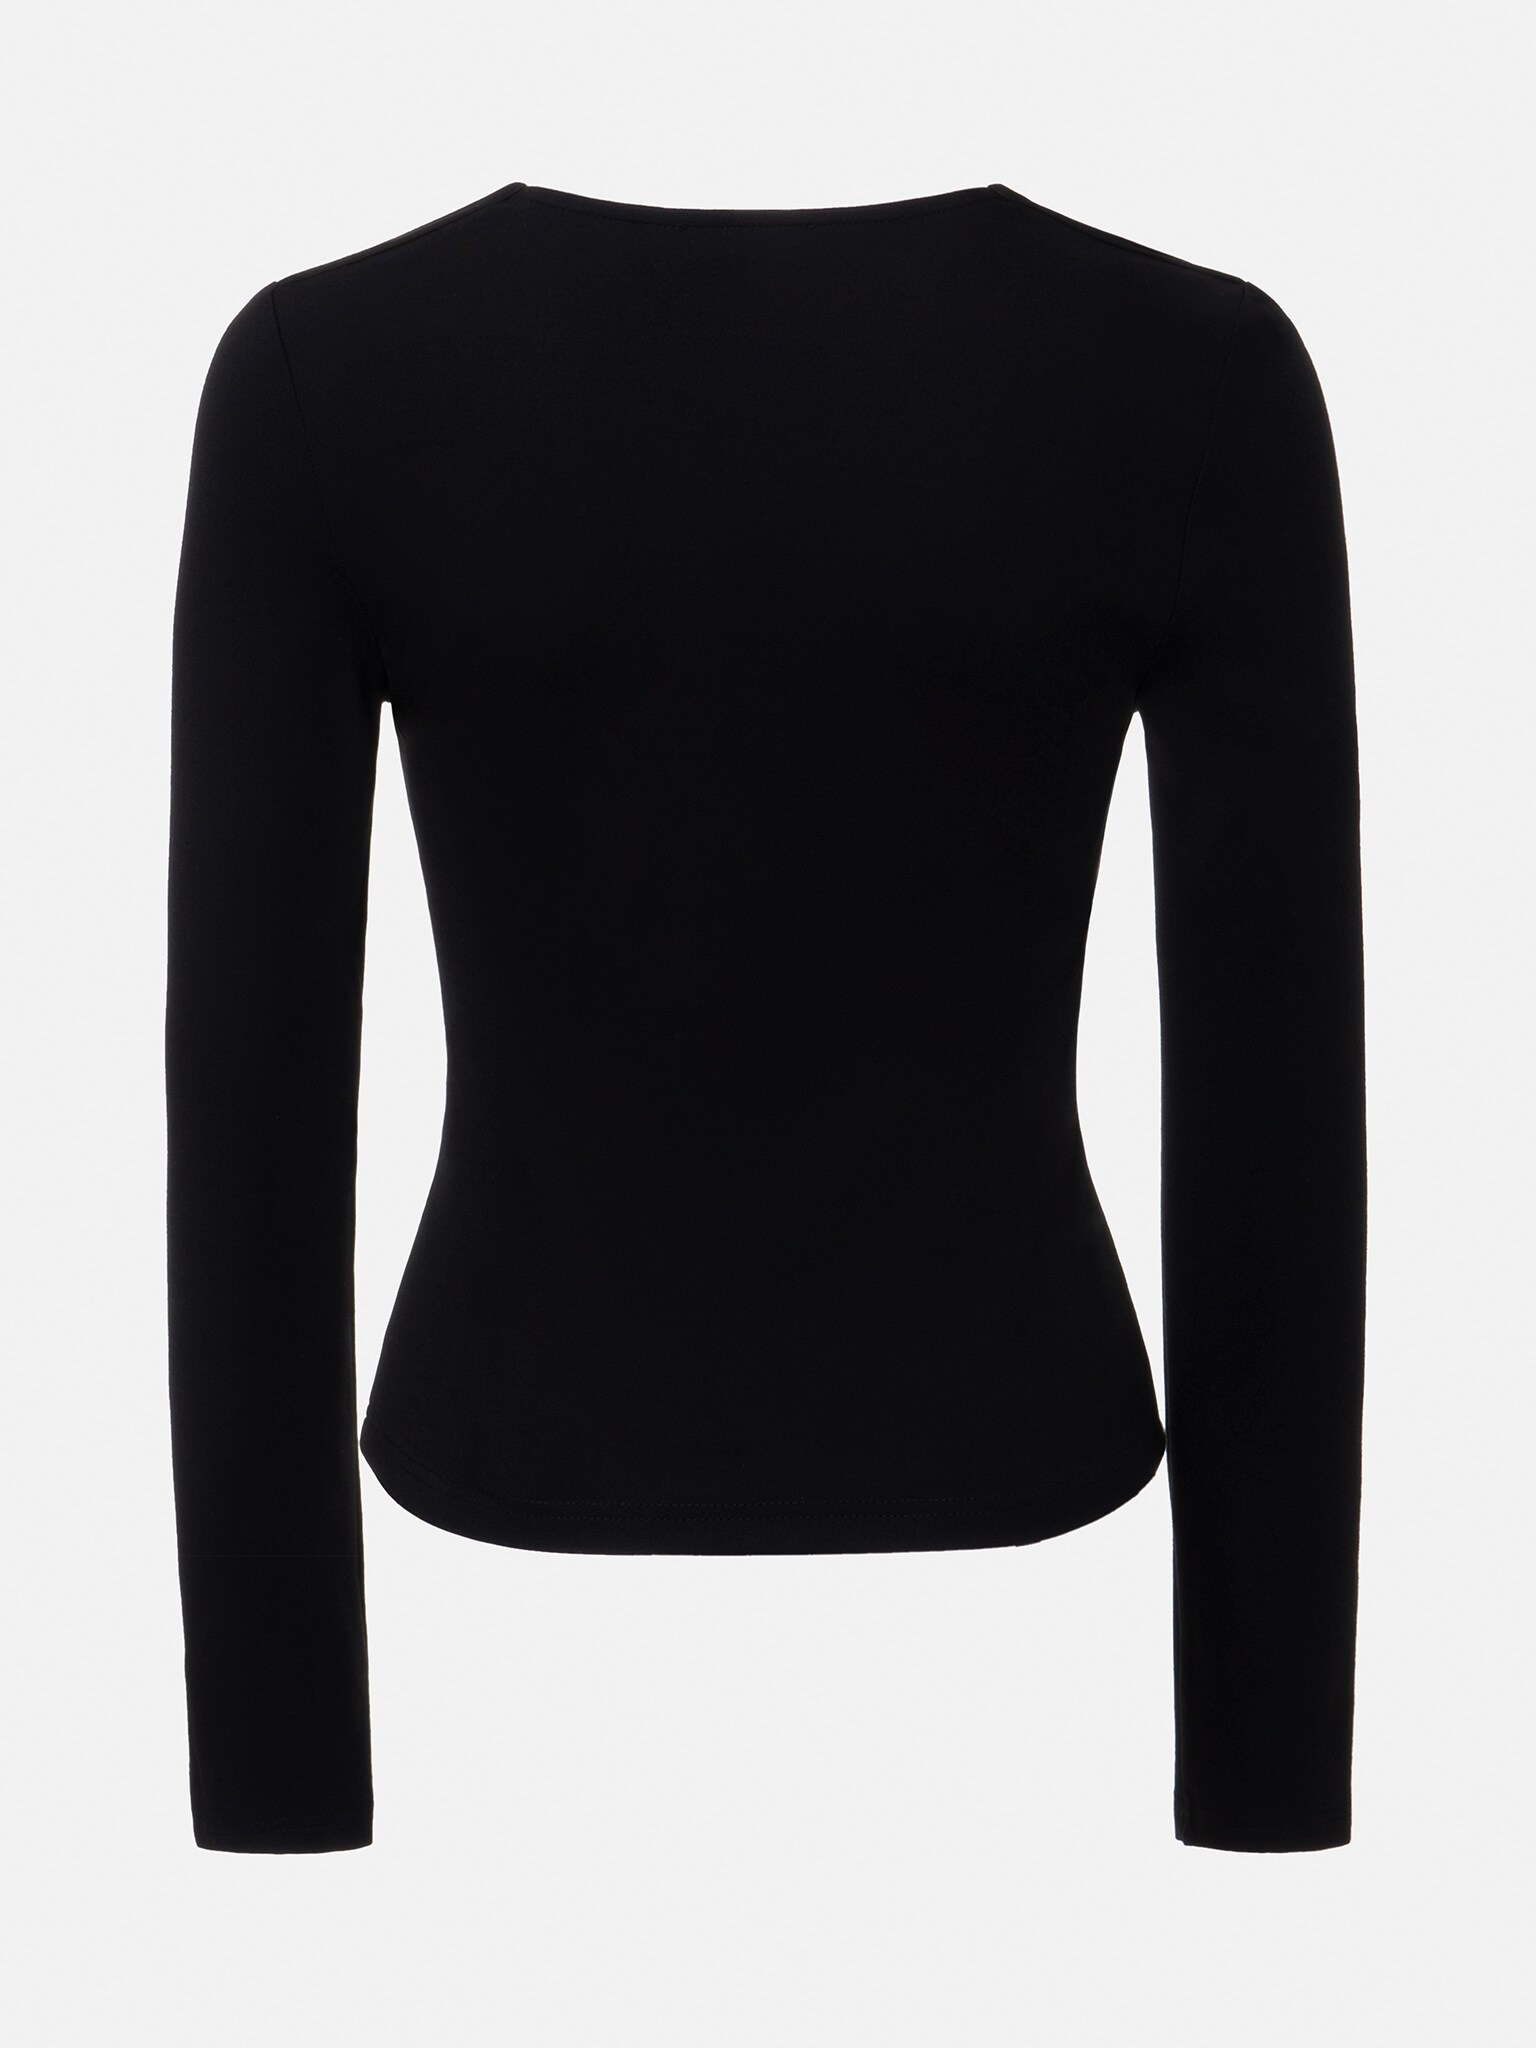 LICHI - Online fashion store :: Sweetheart-neck jersey top with molded cups